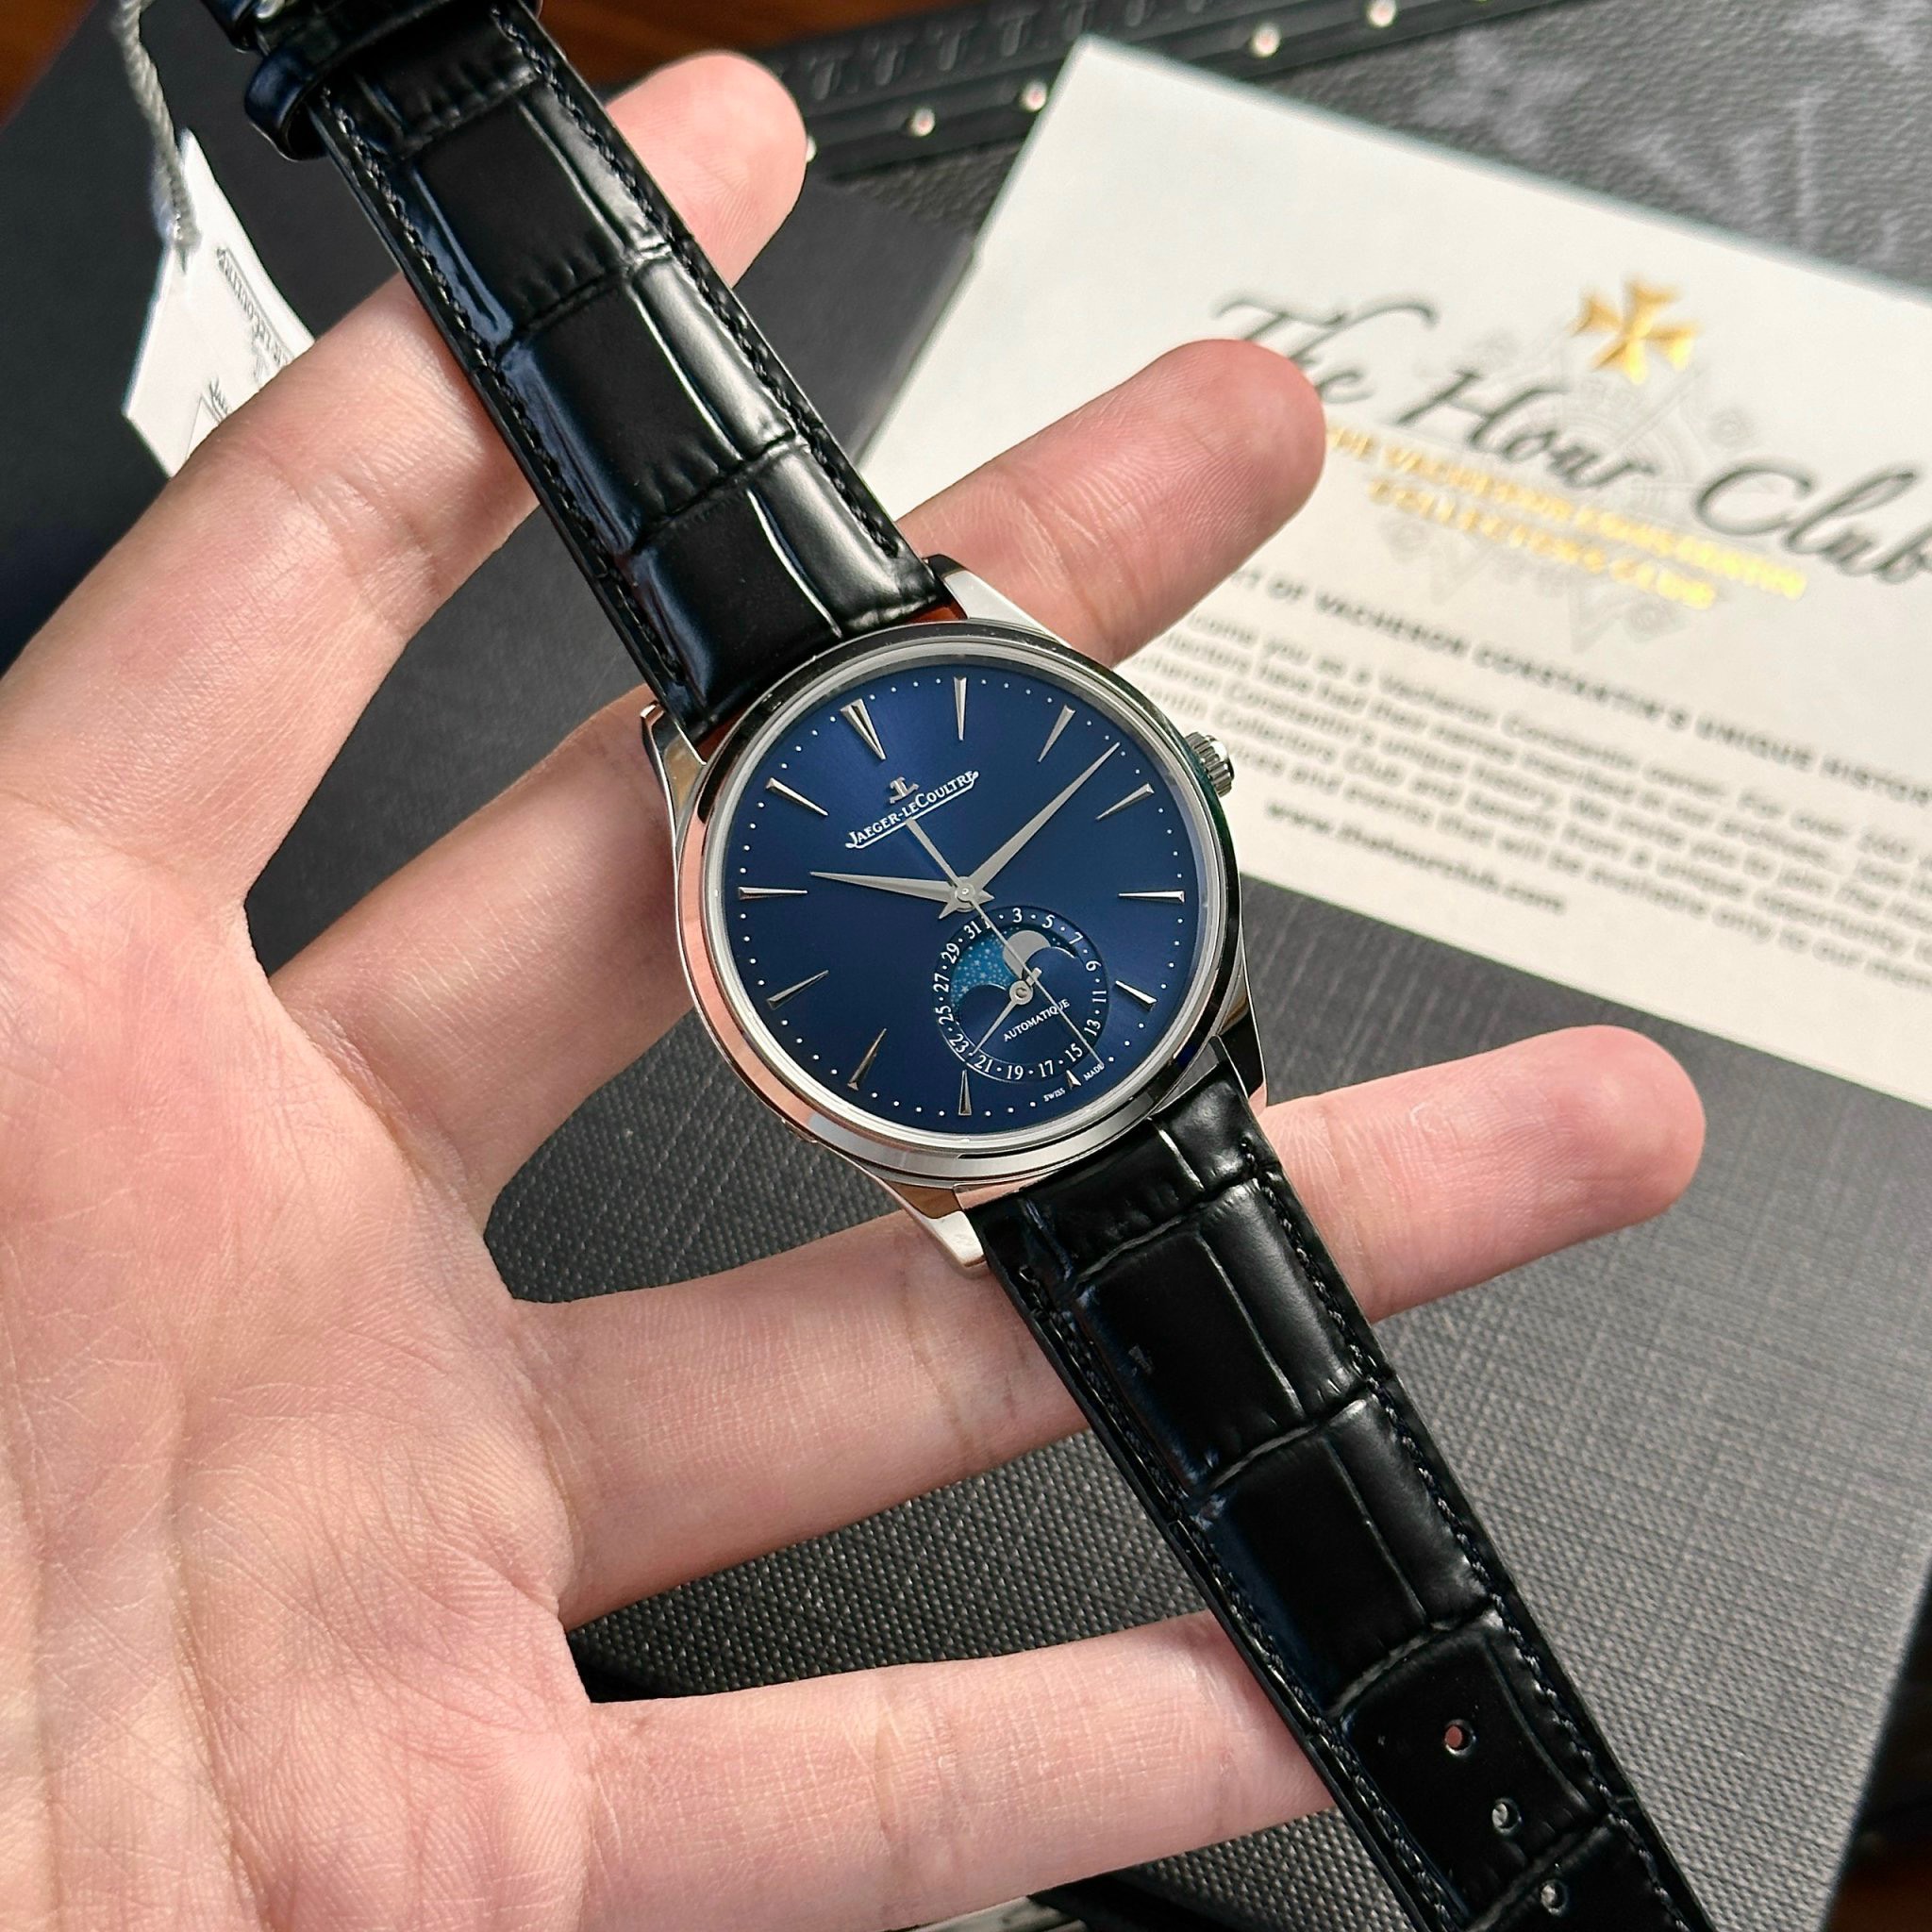 JAEGER-LECOULTRE MASTER ULTRA THIN 39 MM - Đồng Hồ Jaeger-LeCoultre - Nam - DHNTT1536